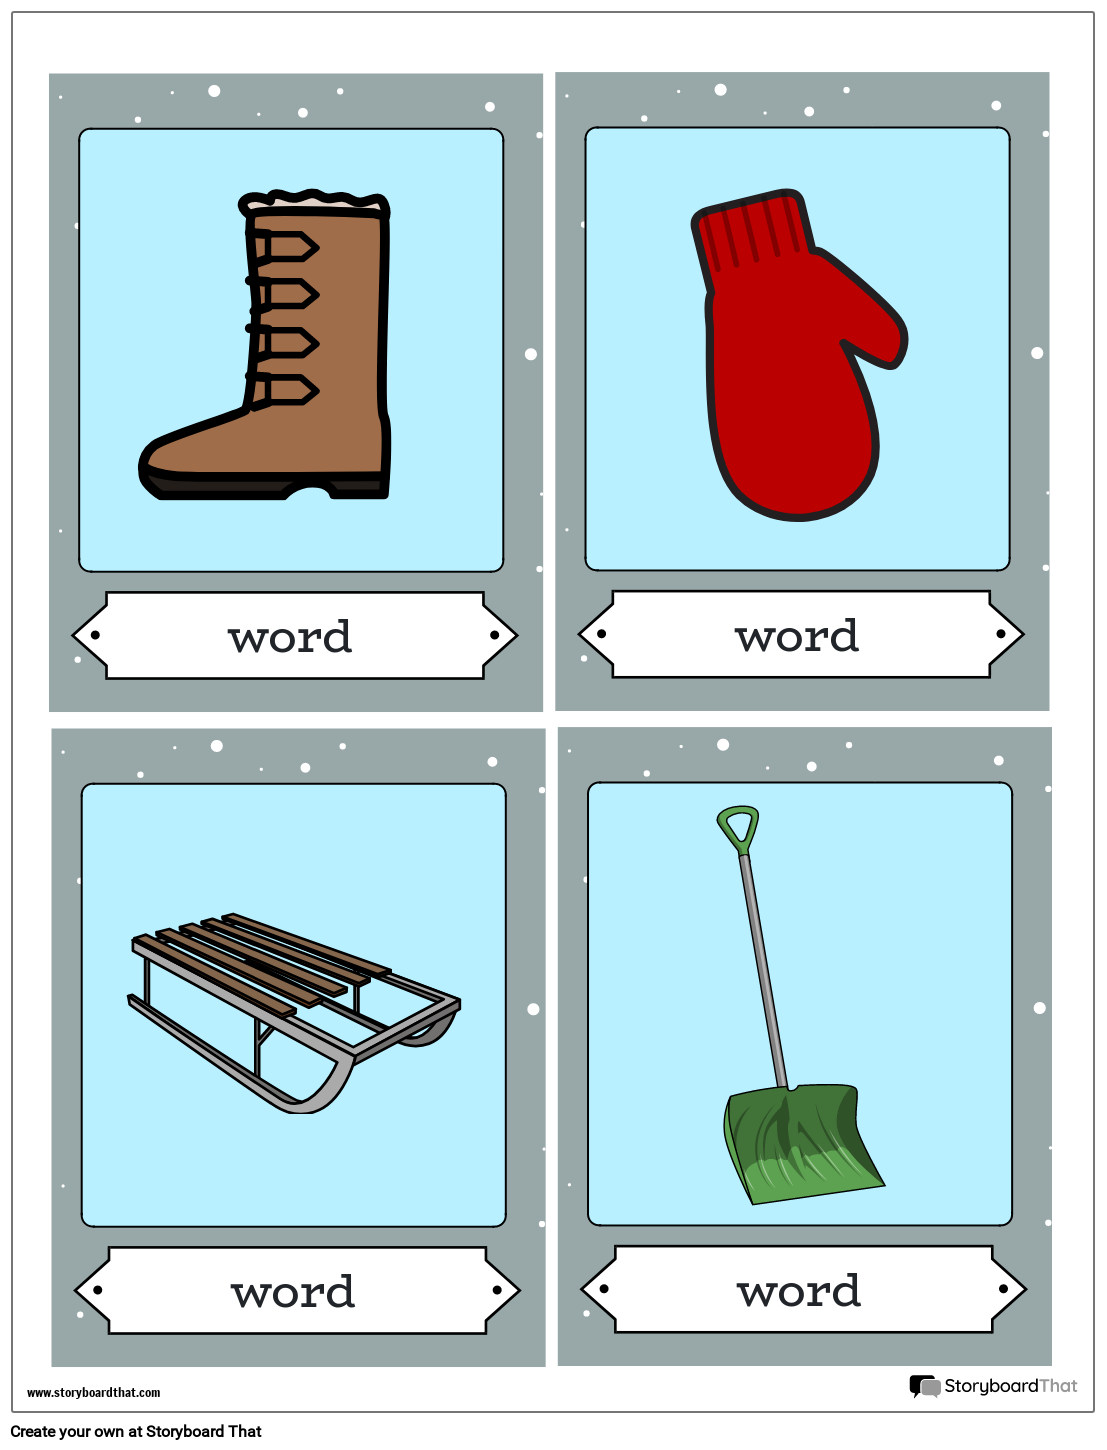 Winter Card Game